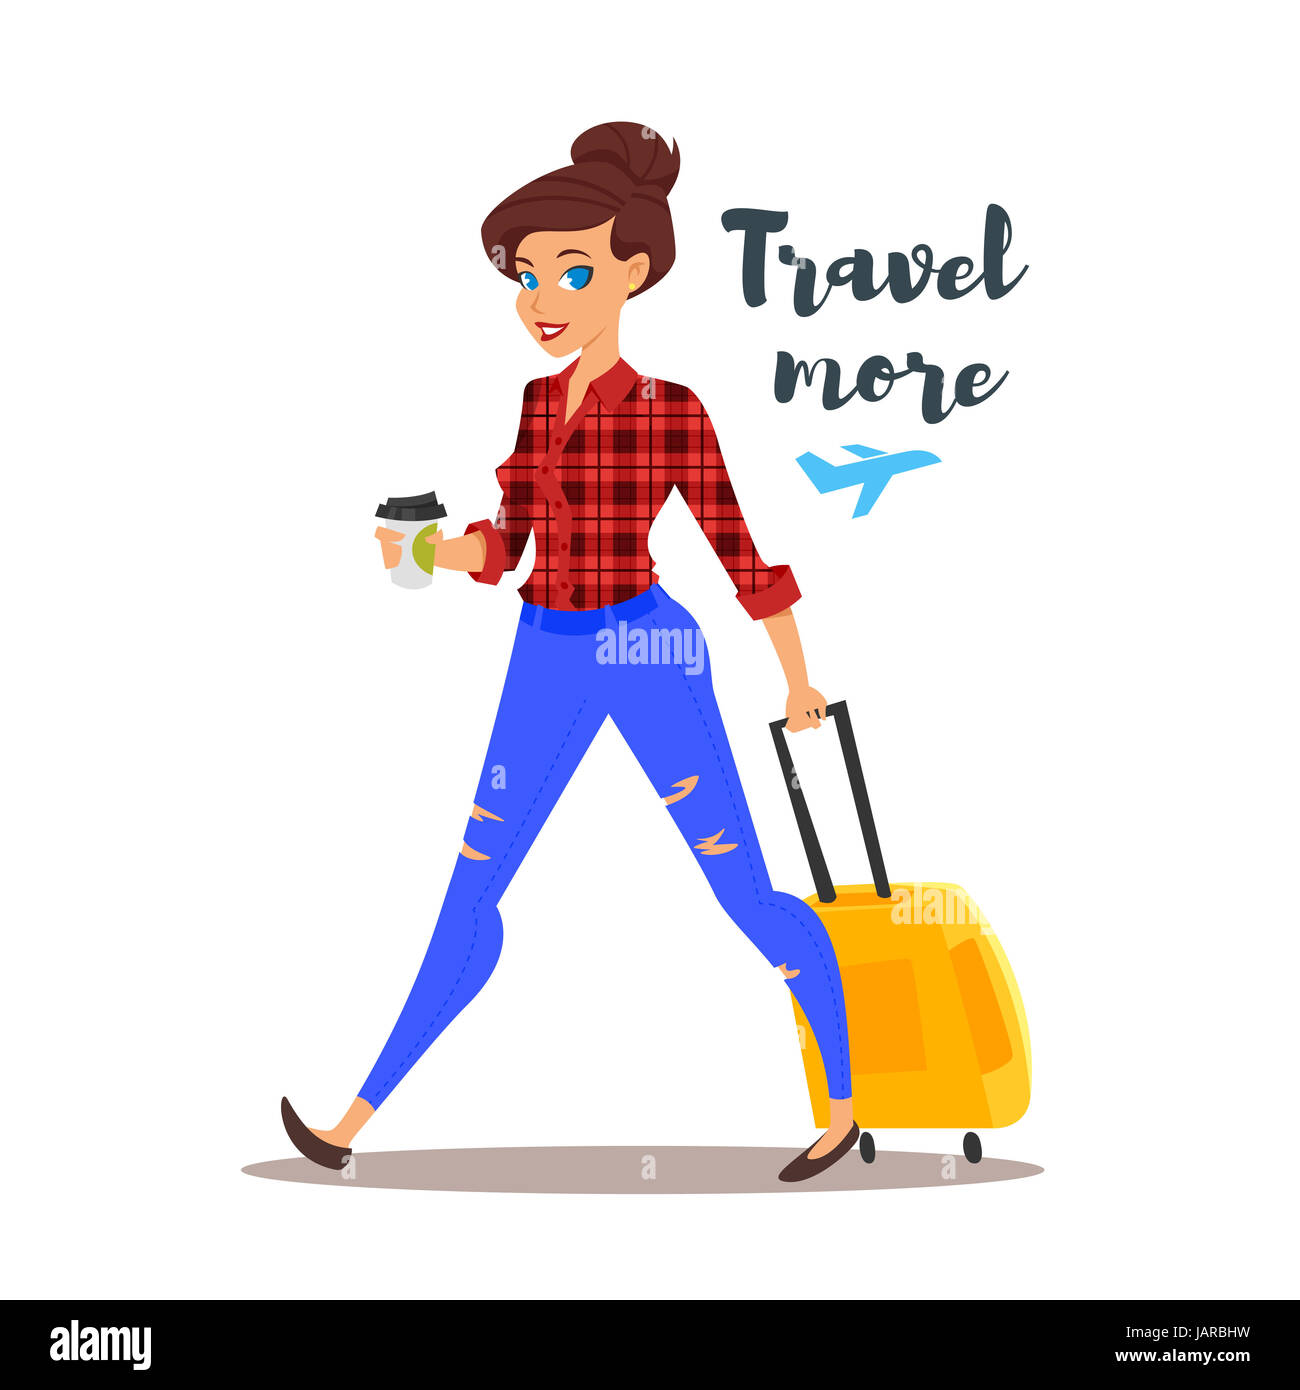 Vector flat style illustration of young pretty woman with a travel case. Travel more motivational poster. Isolated on white background. Stock Photo